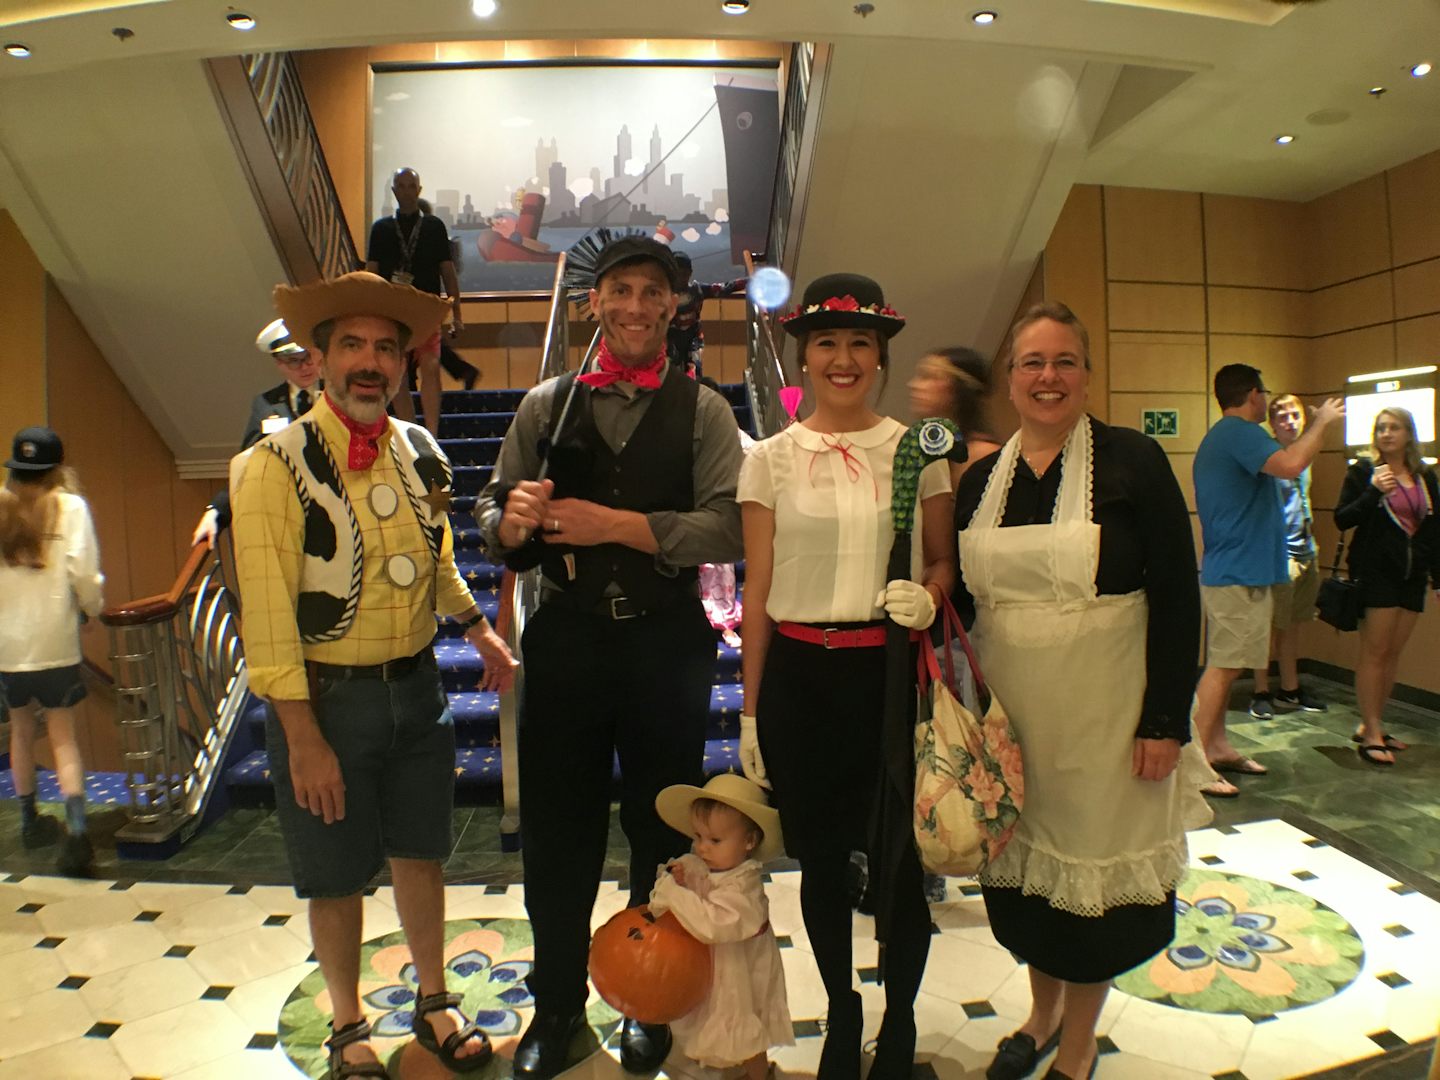 Great Mary Poppins family on Halloween.